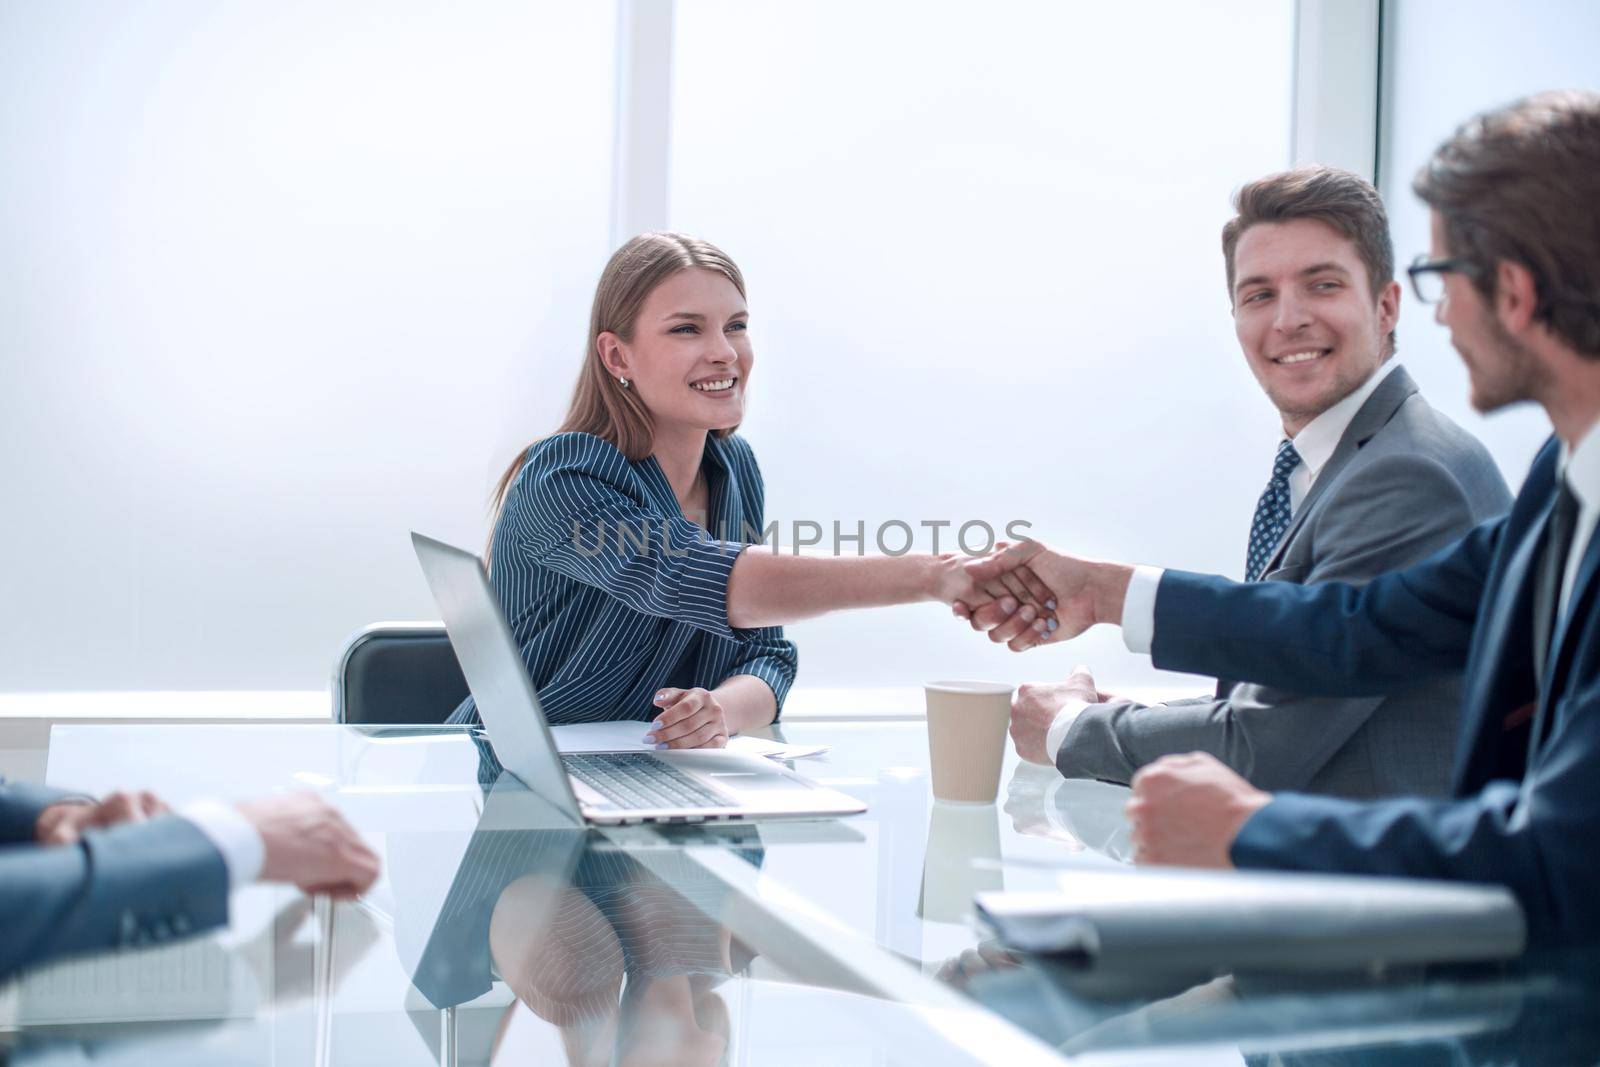 Business people shaking hands in the boardroom. concept of partnership